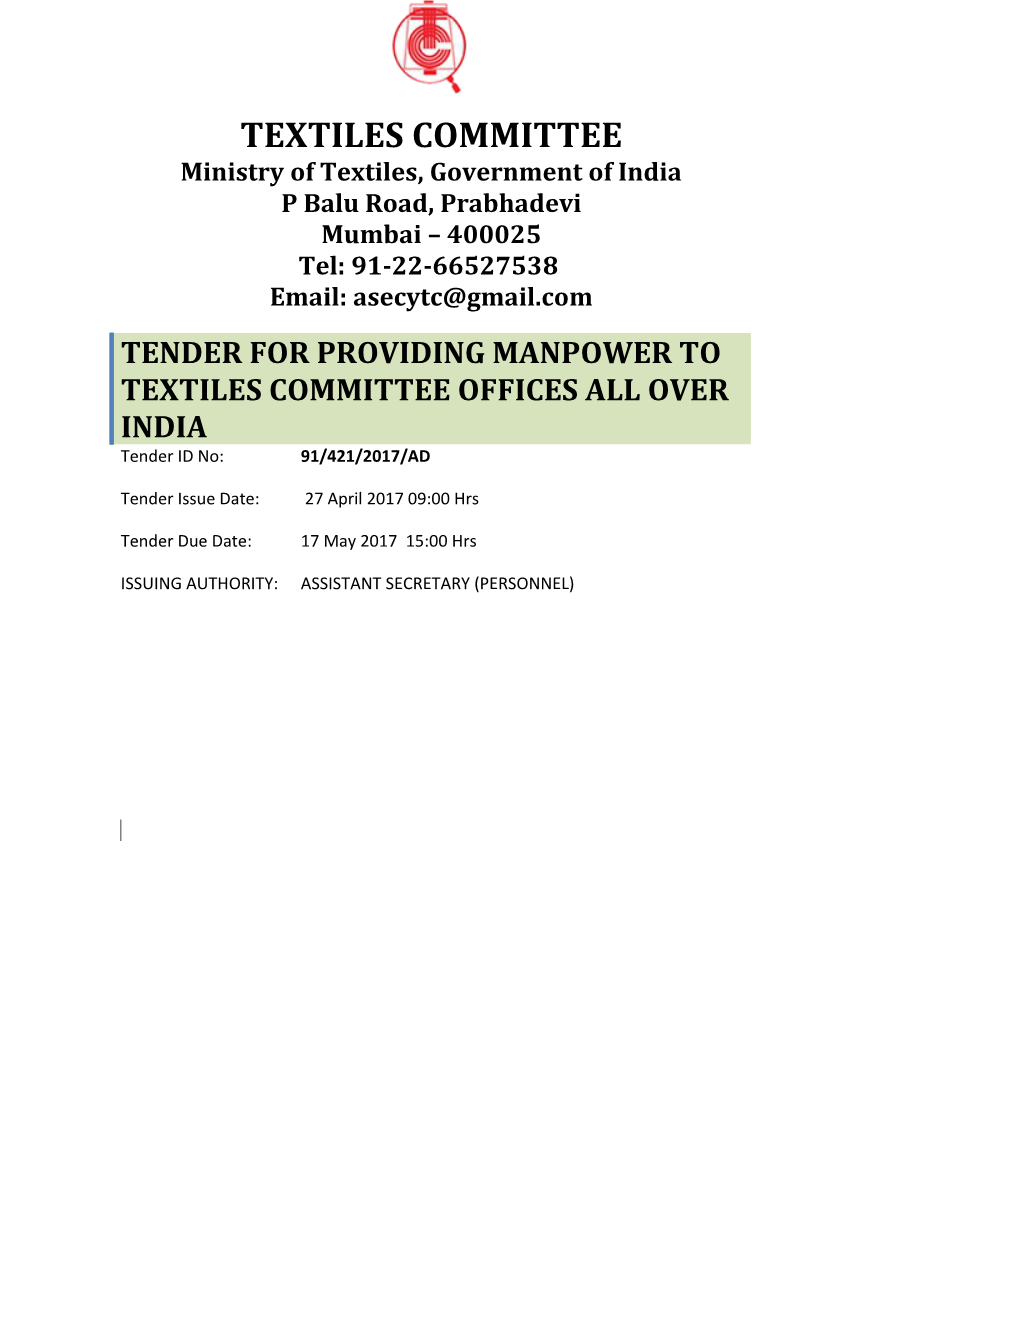 Tender for Providing Manpower to Textiles Committee Offices All Over India